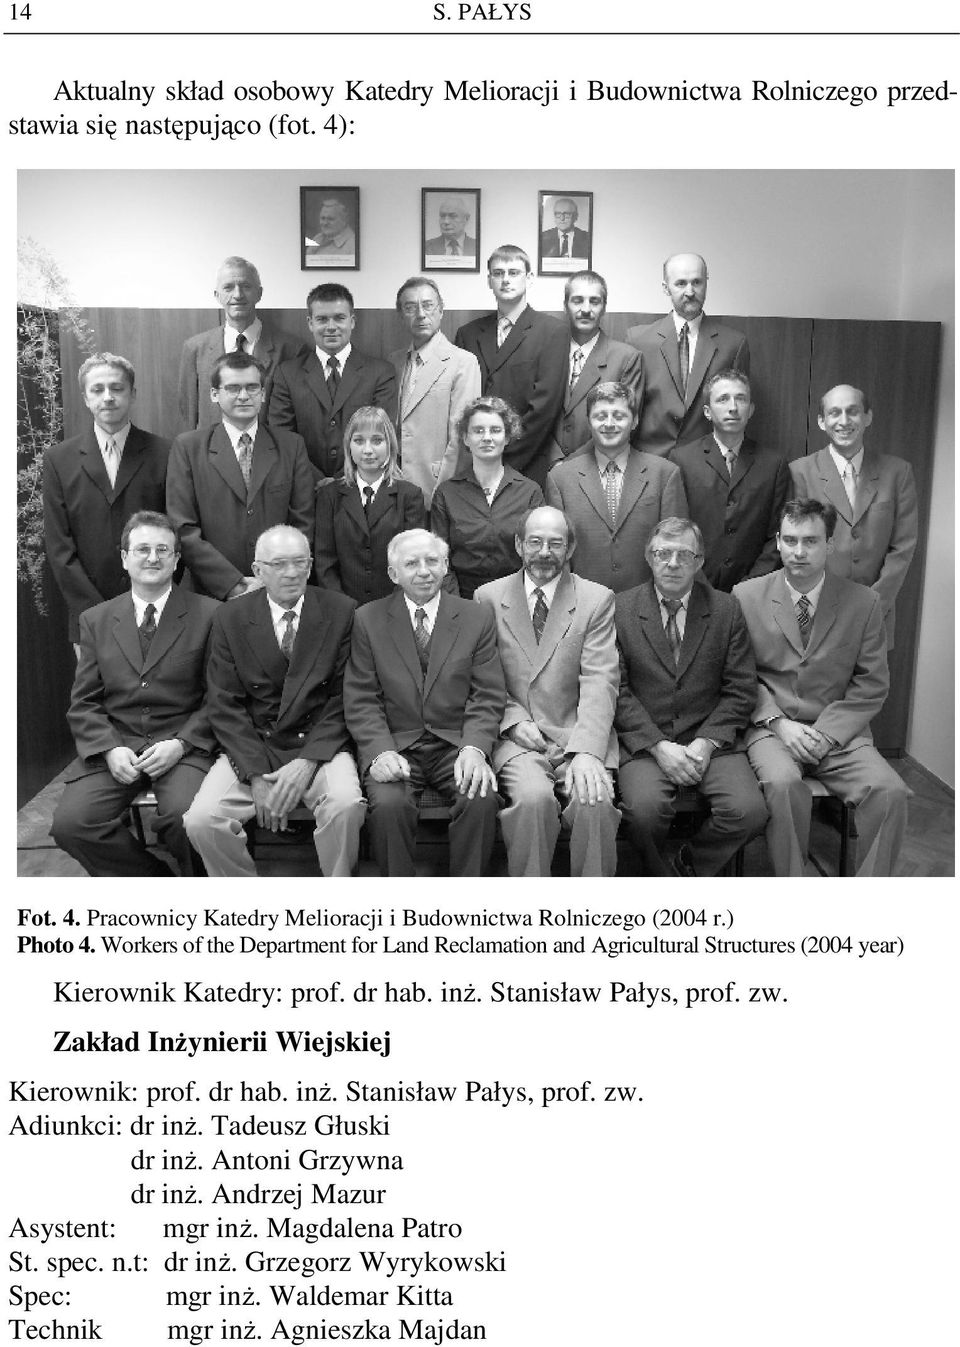 Workers of the Department for Land Reclamation and Agricultural Structures (2004 year) Kierownik Katedry: prof. dr hab. inŝ. Stanisław Pałys, prof. zw.